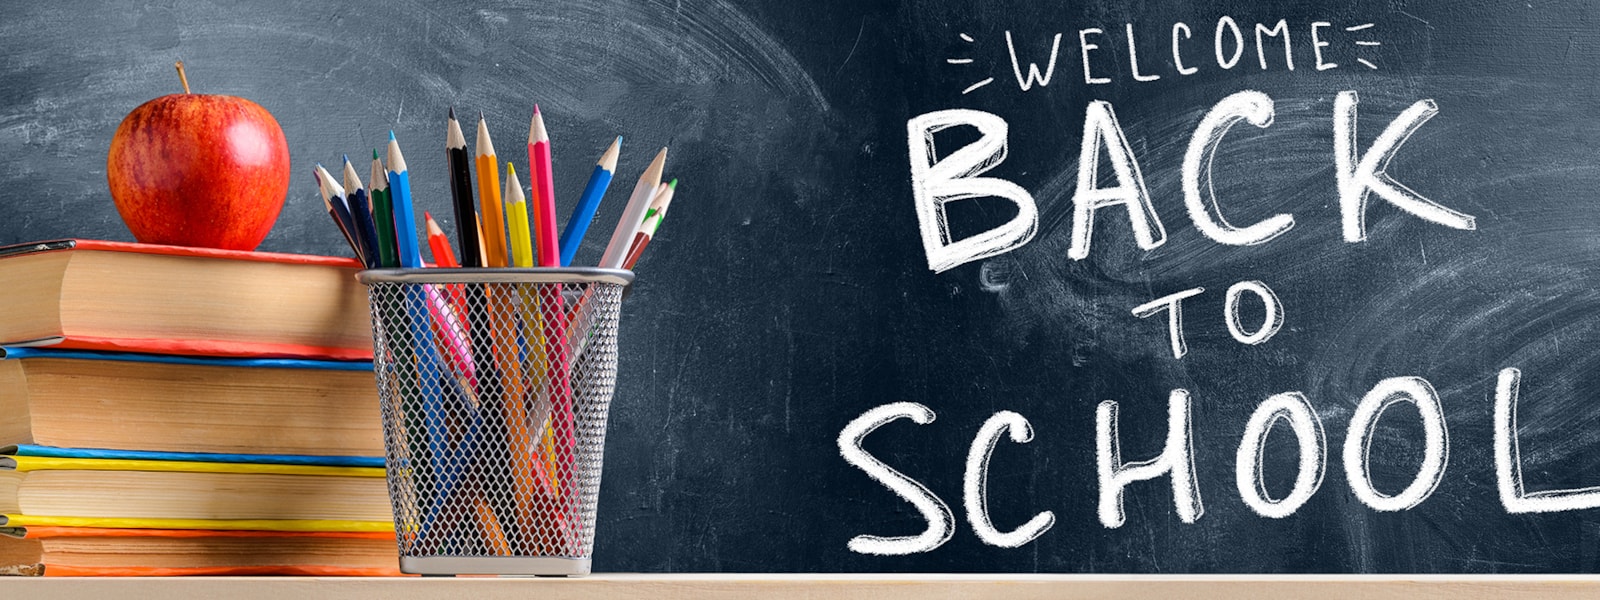 Welcome back to school sign on a chalkboard with a an apple, books and pencils next to it.